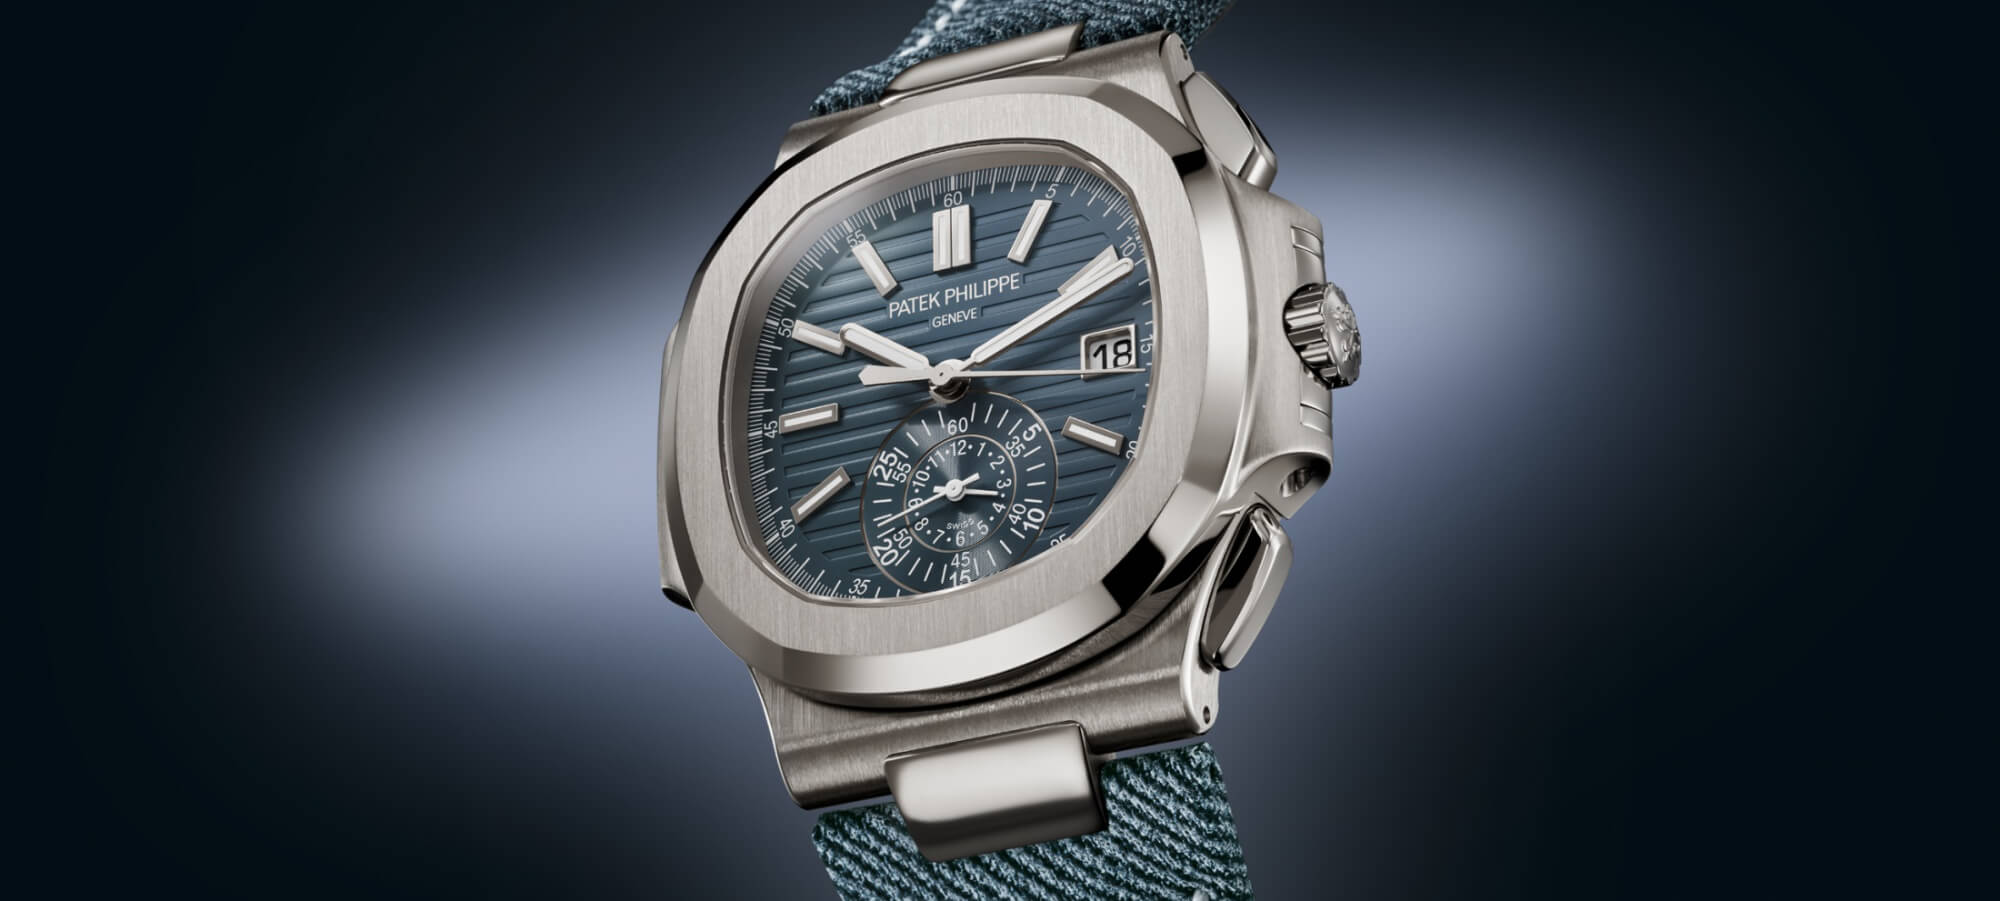 New Release: Patek Philippe Revives The Classic Nautilus Chronograph With The Ref. 5980-60G Watch | aBlogtoWatch